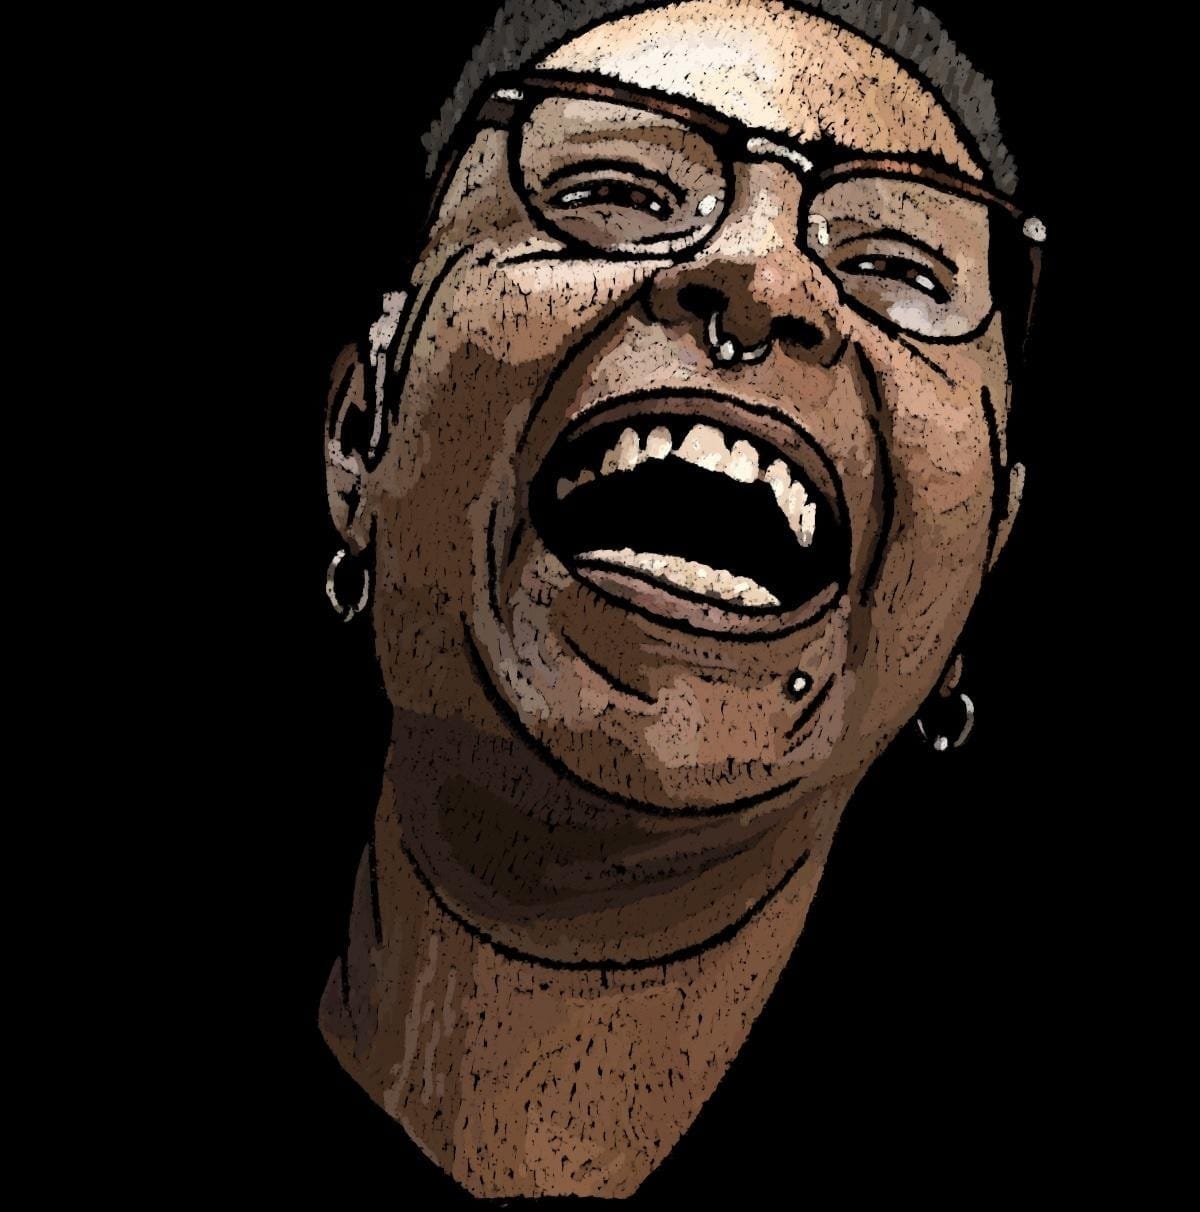 An illustration of Crystal Mason by Jason Wyman with a large smile on their face and wearing glasses with multiple piercings. 